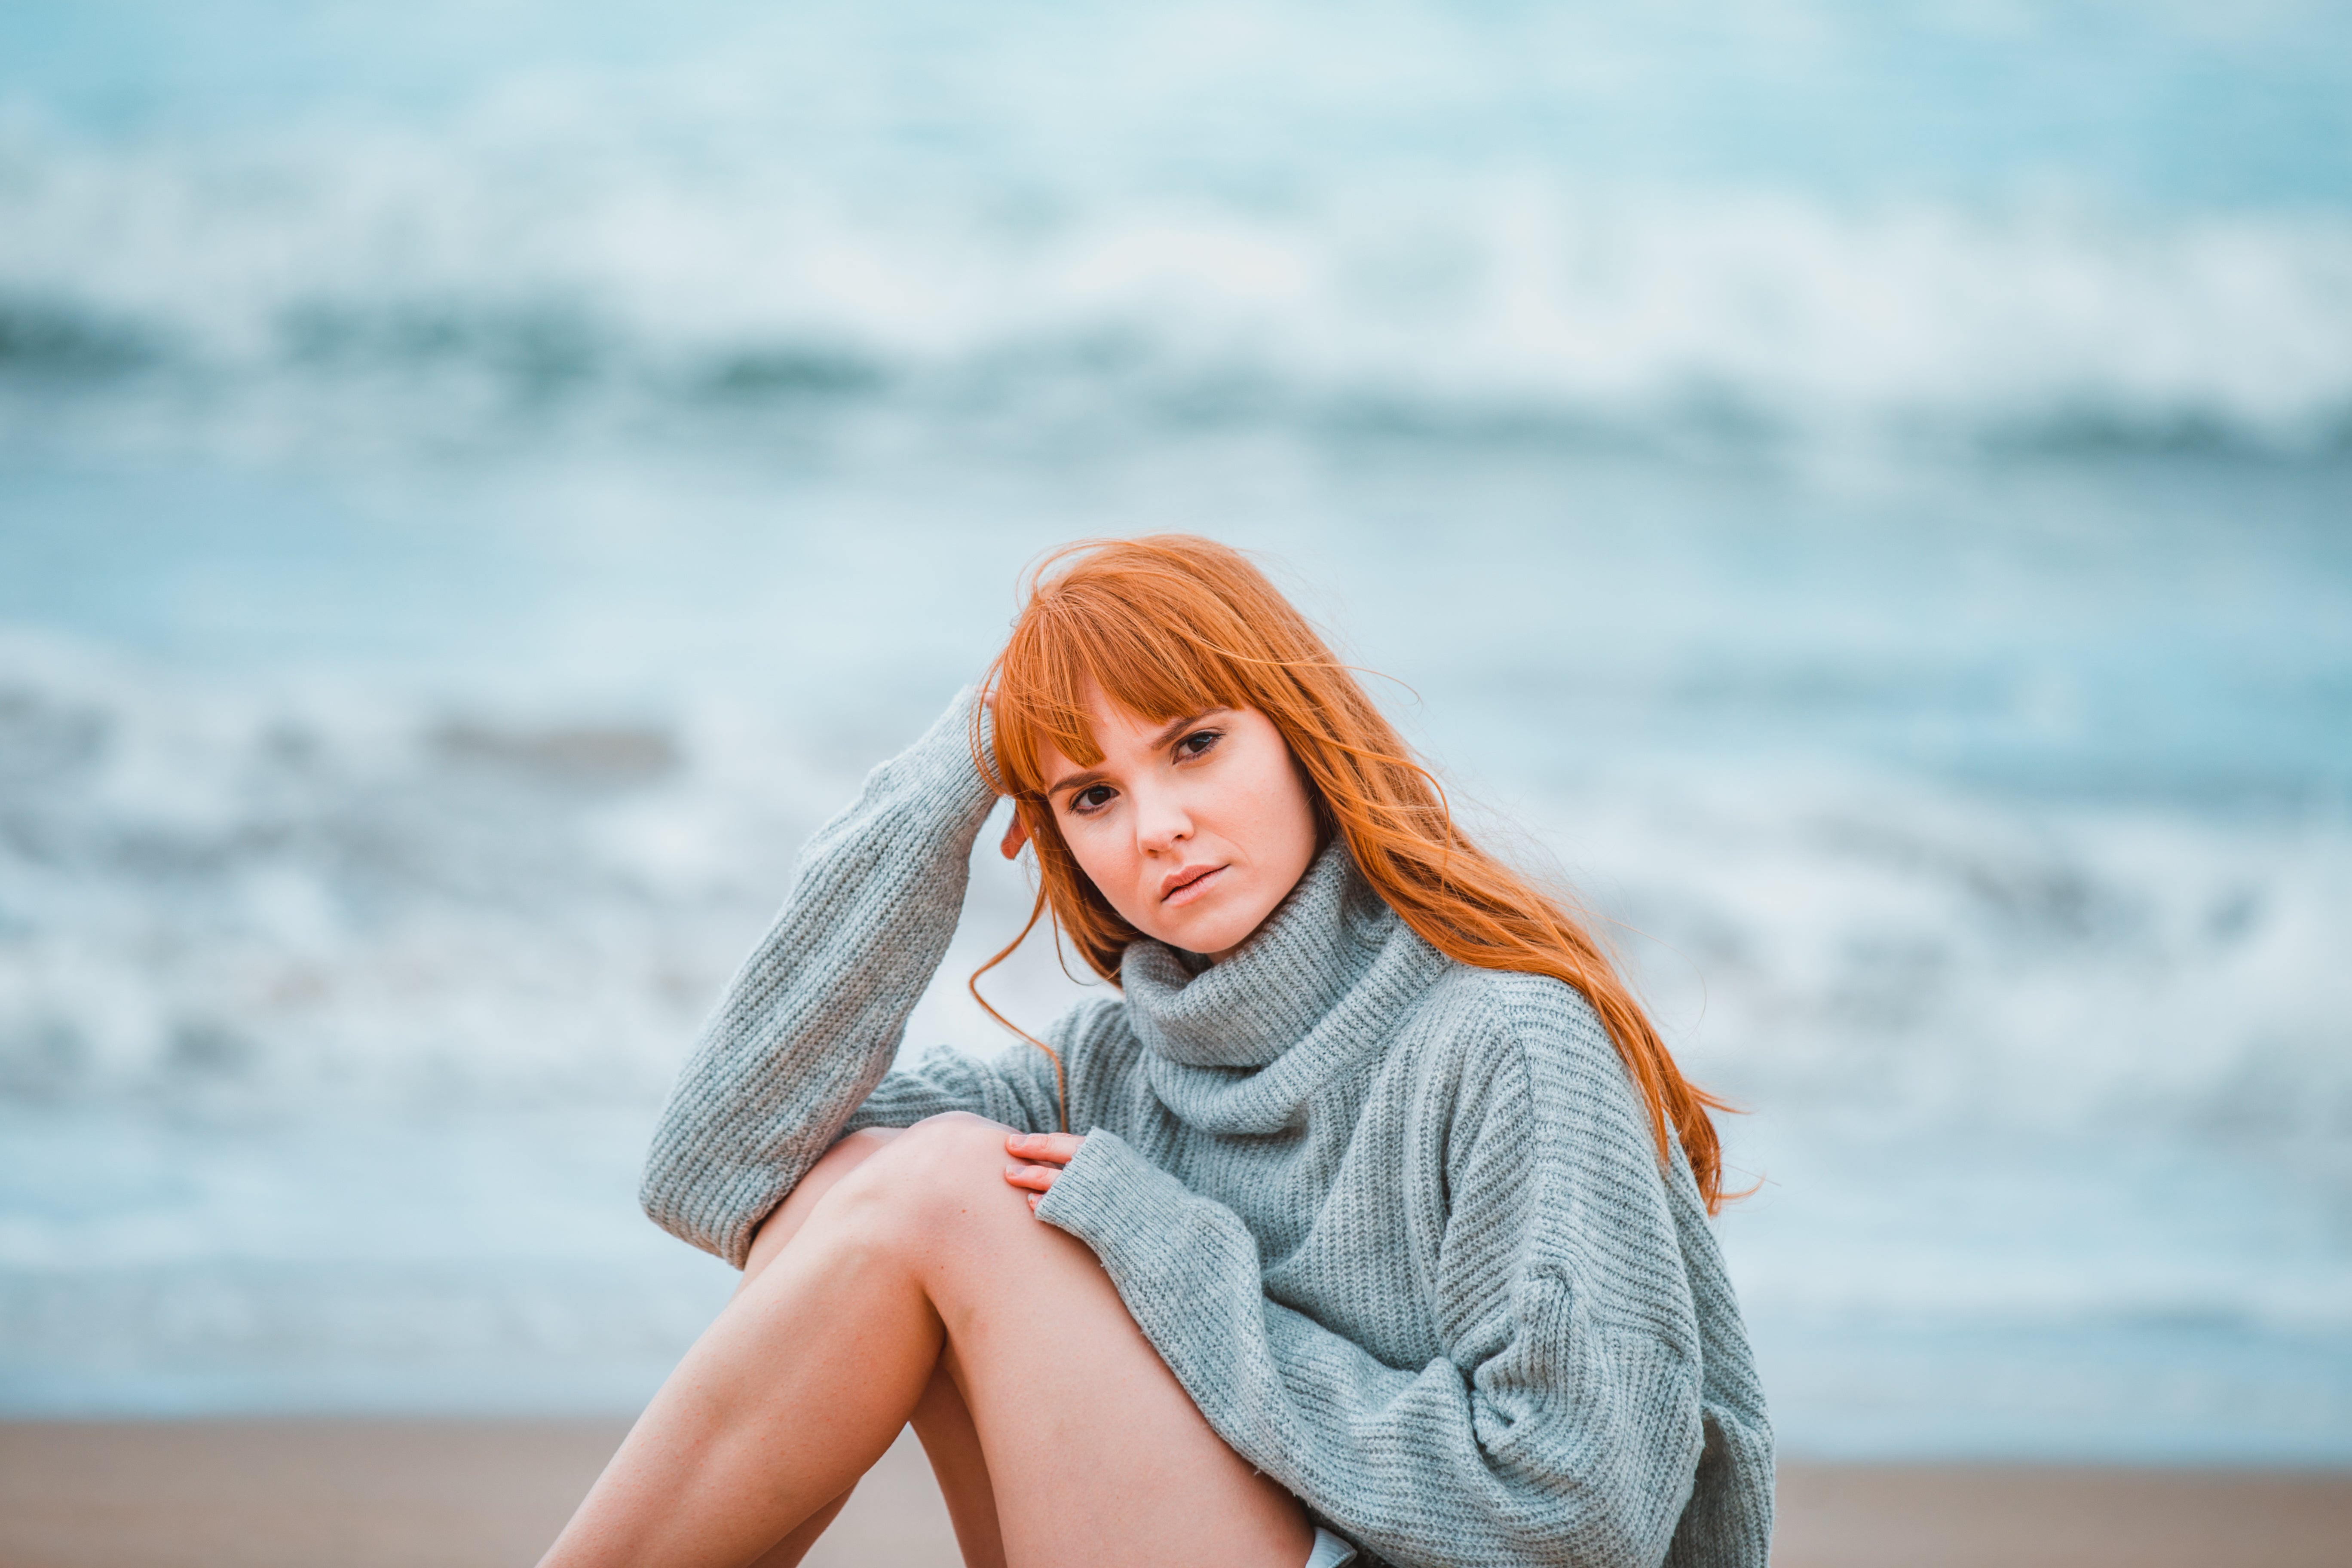 A female model with long flowing red hair is sitting on a beach. She is looking at the camera with a neutral expression. There is sand and waves in the background.